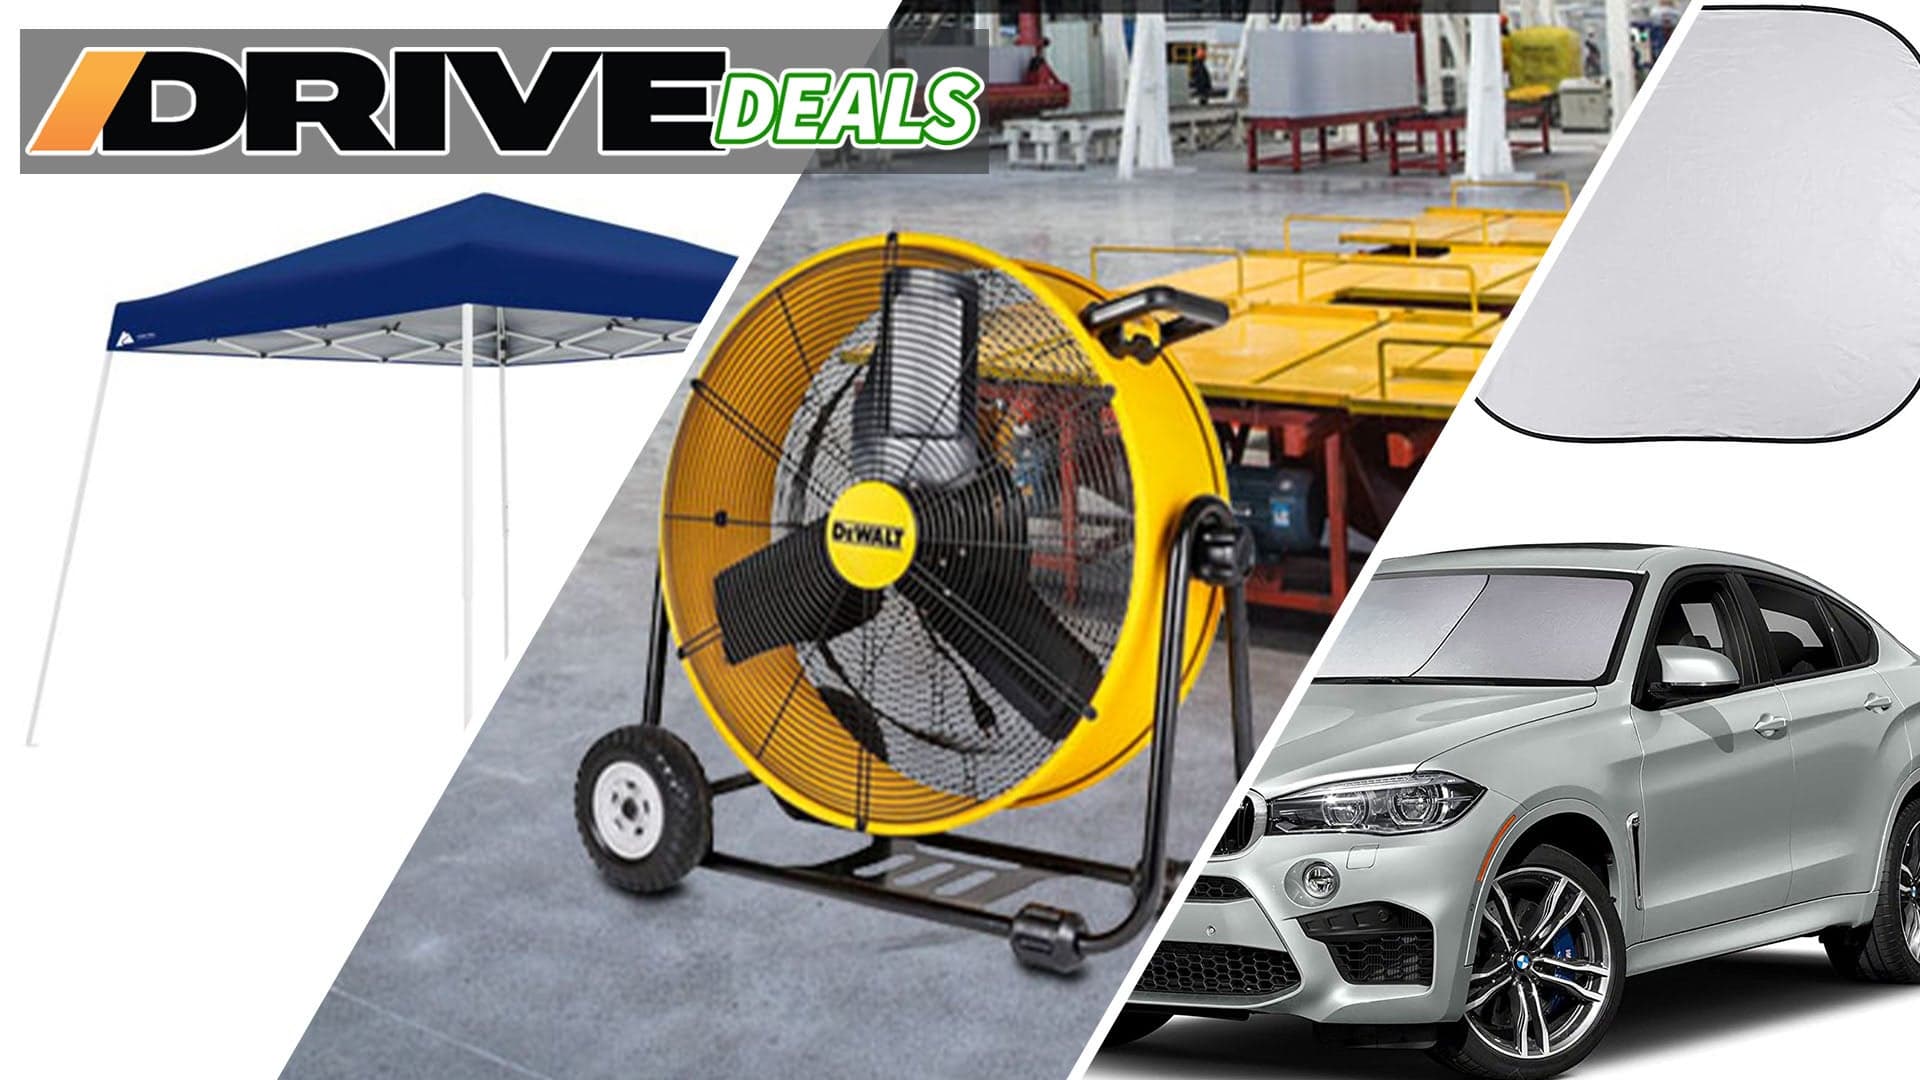 Save on DeWalt’s Drum Fan and Keep out the Sun With Deals From Amazon